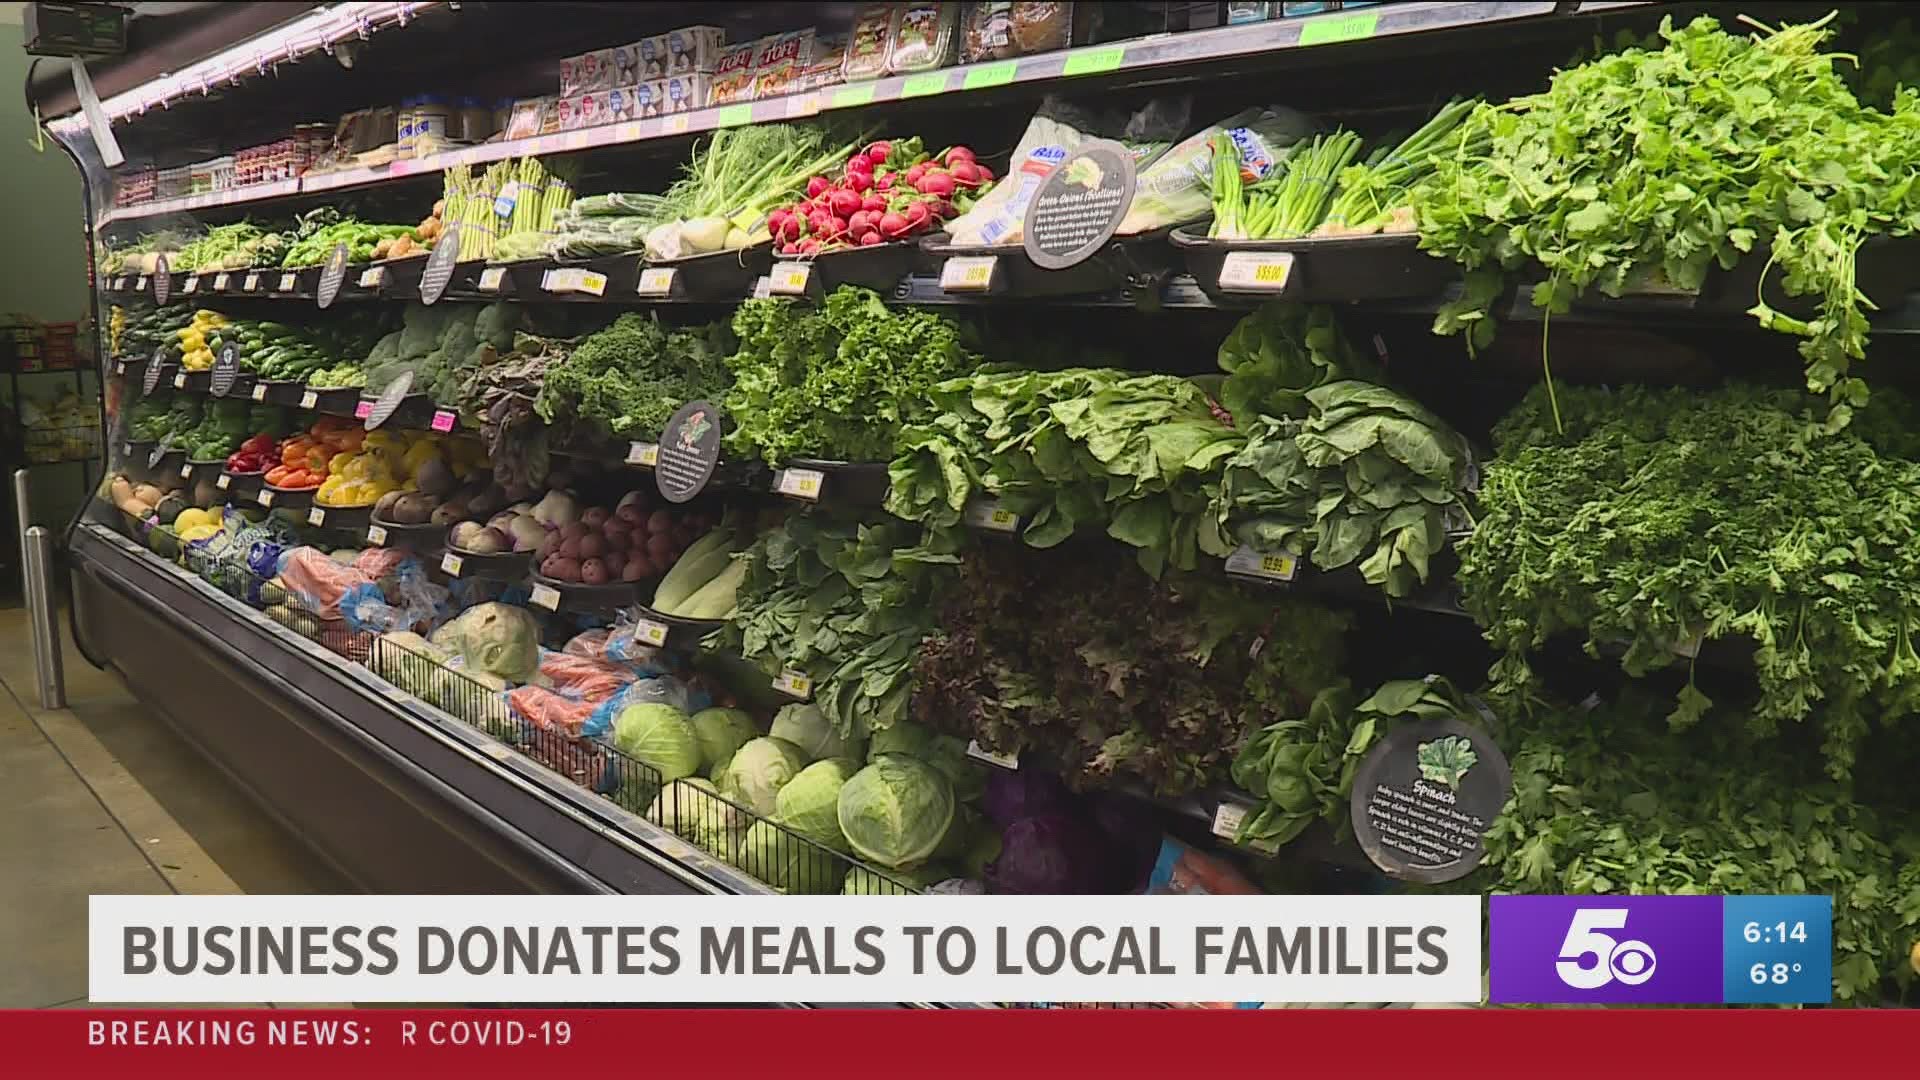 Business donates meals to local families